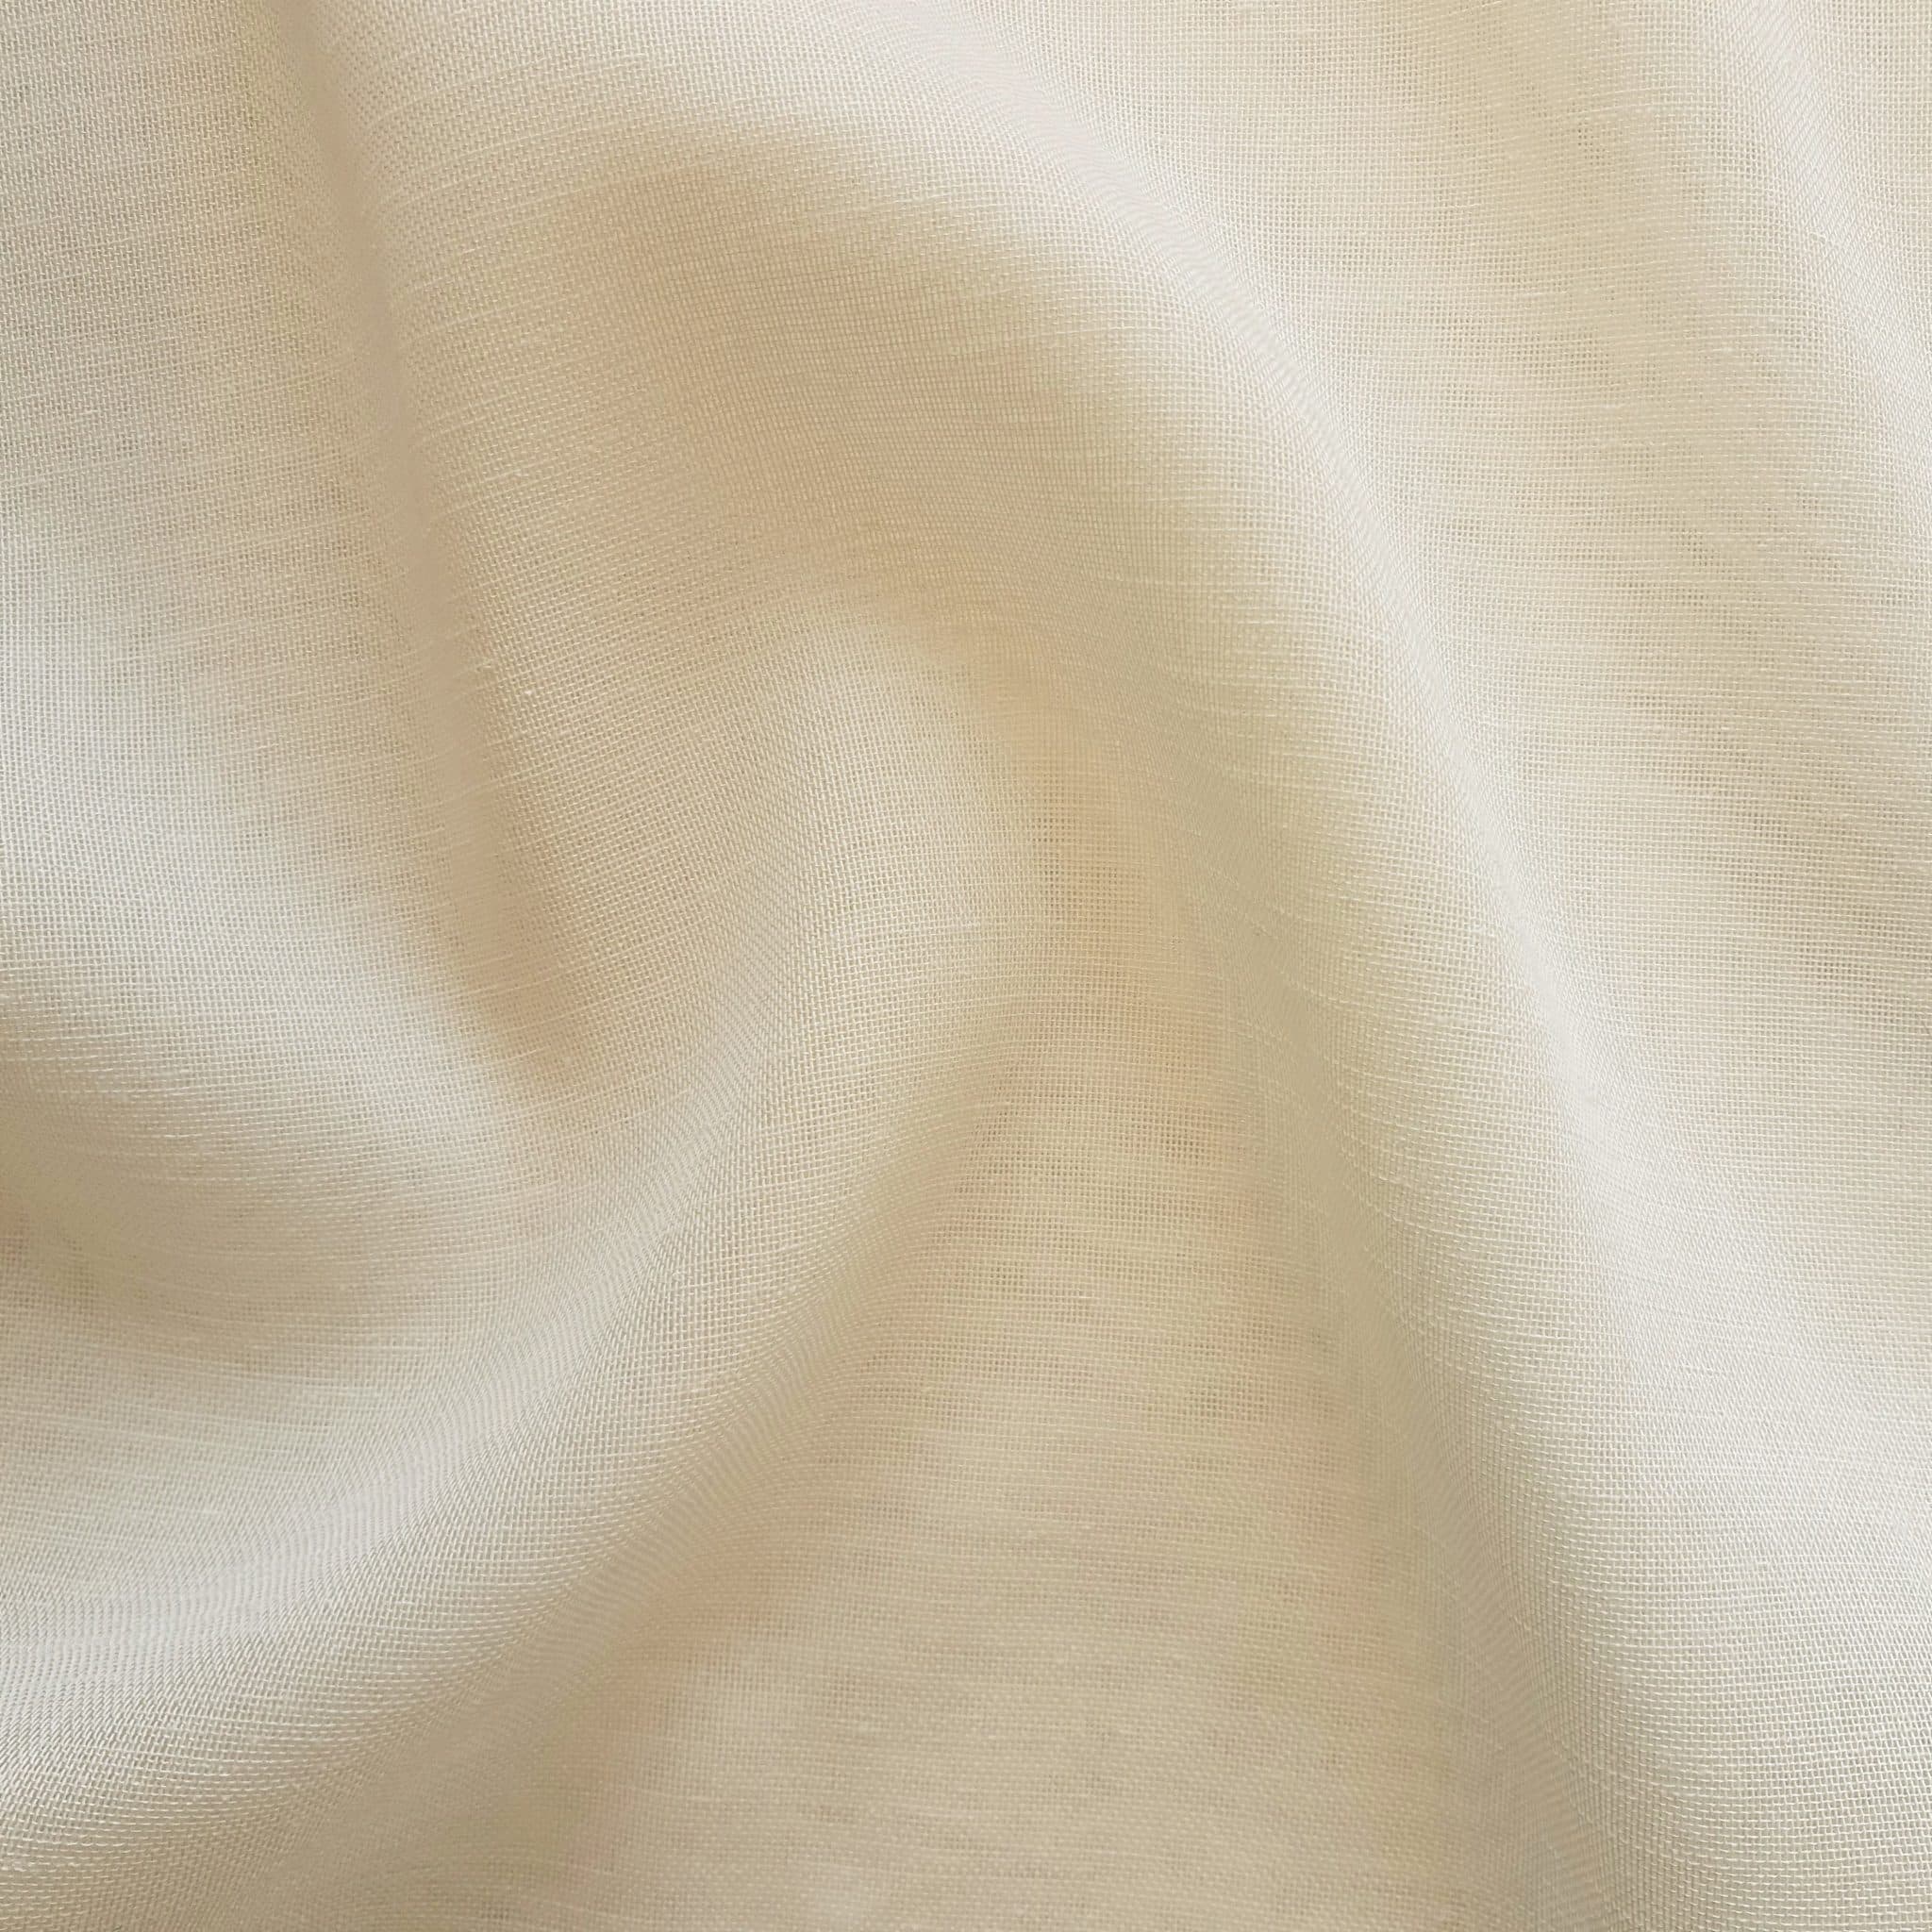 Emin Ivory FR Voile - Linen Look Voile - Off White Voile - Flame Retardant